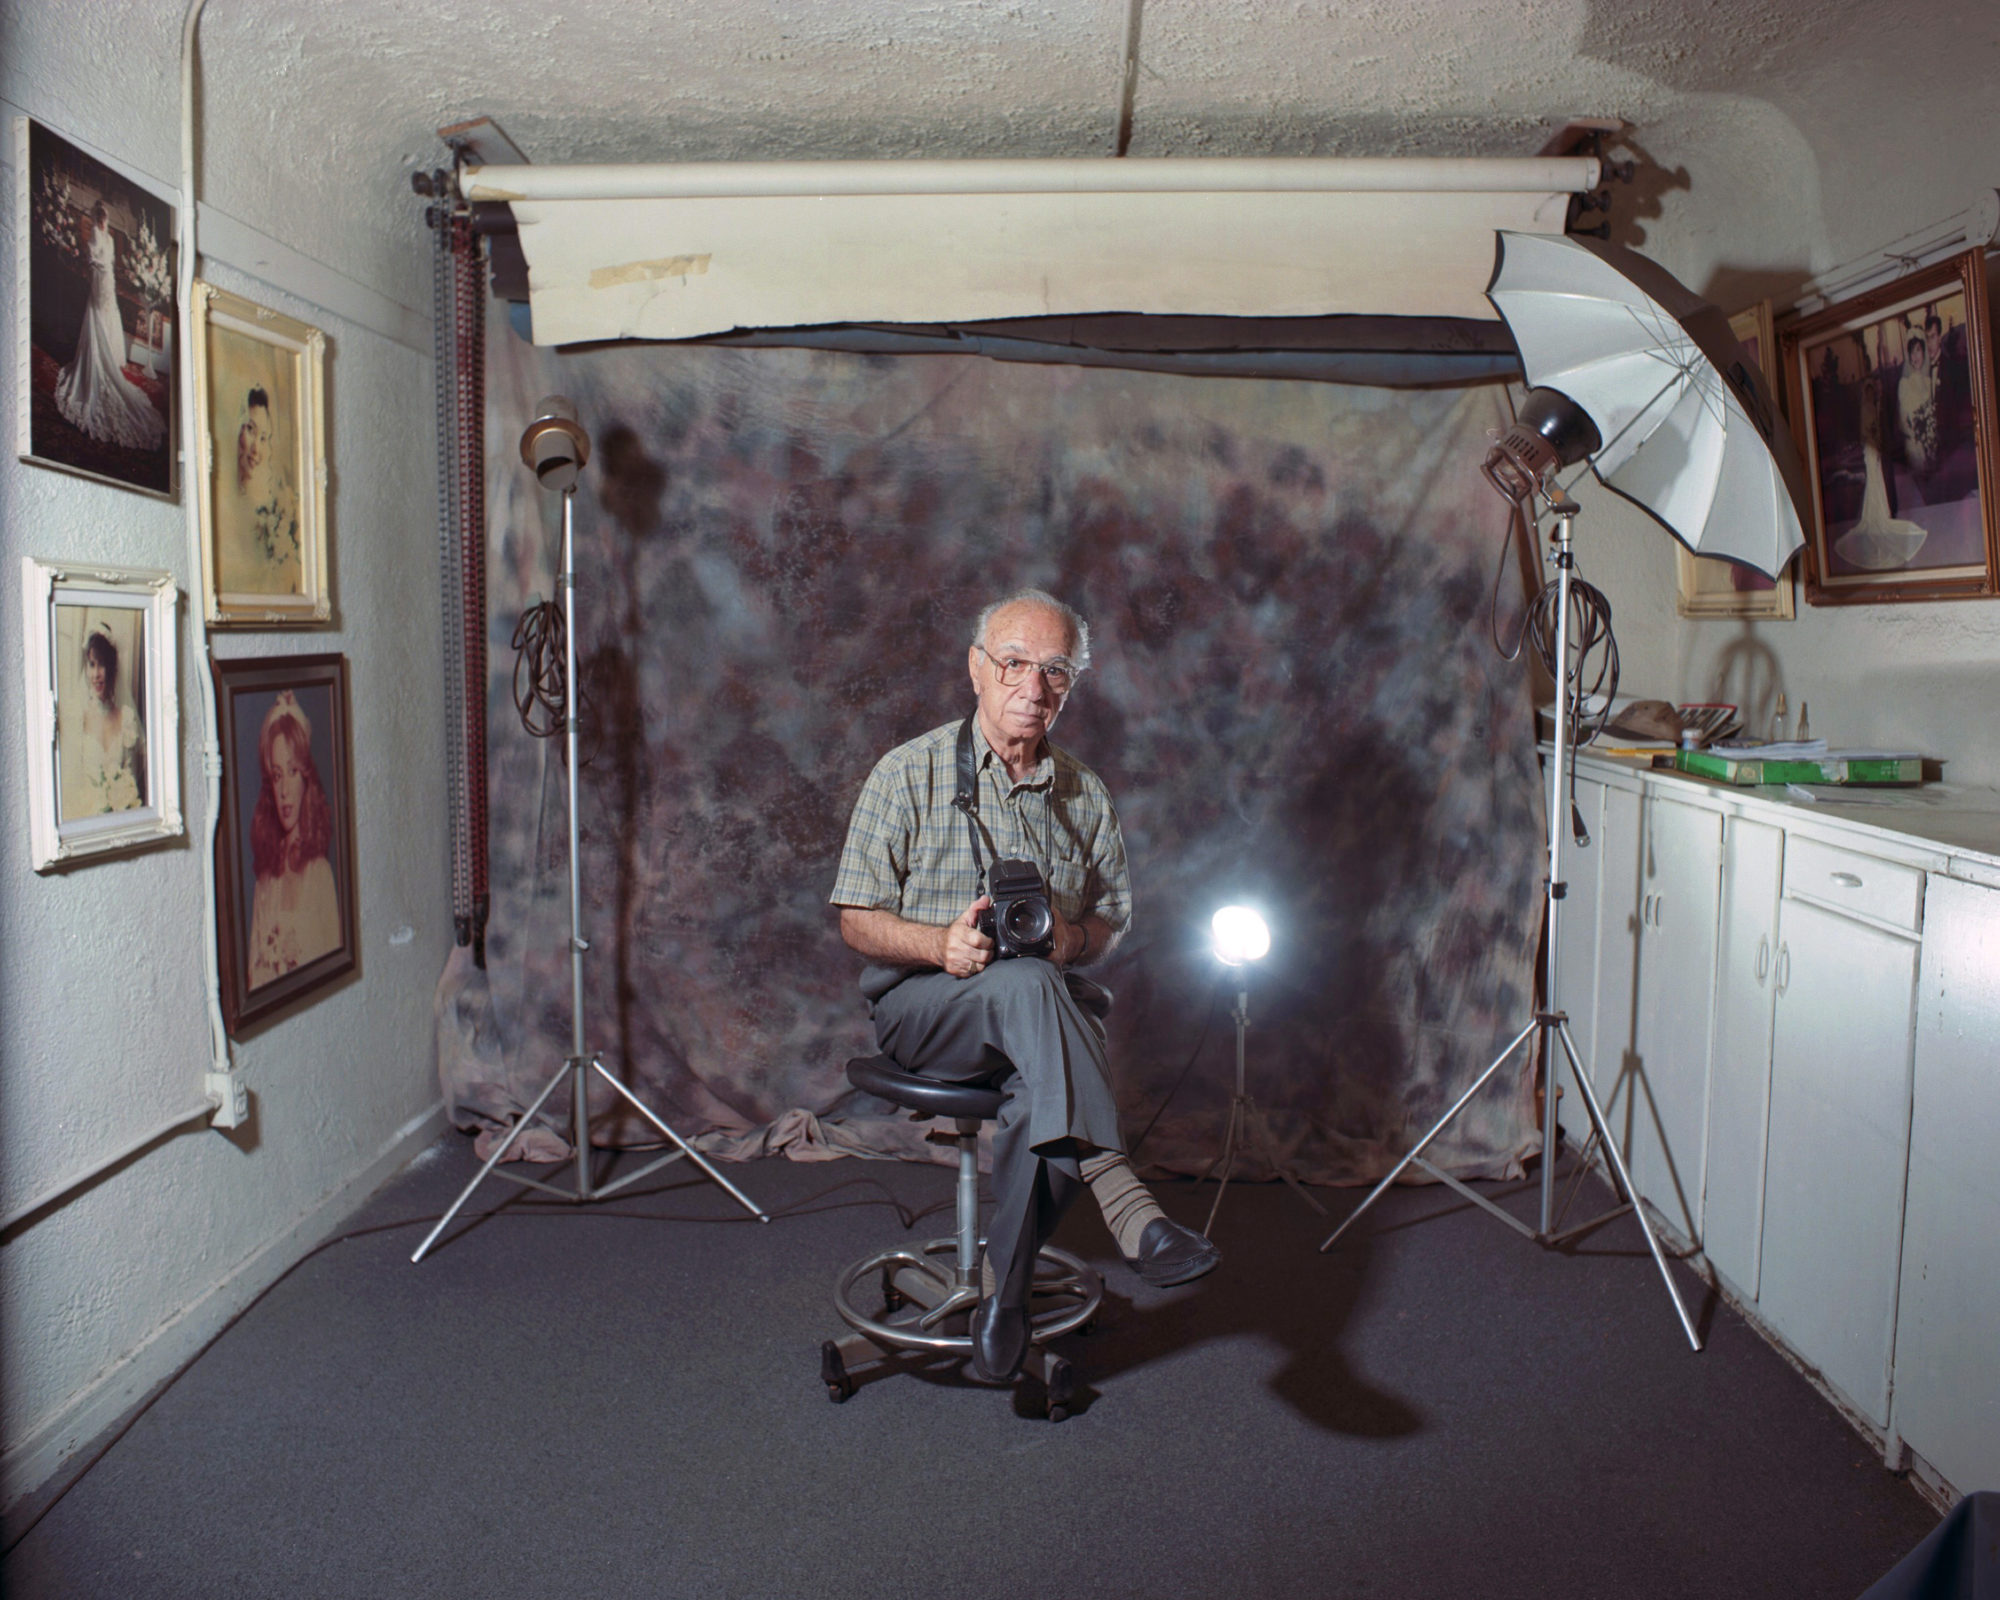 A portrait of an elderly man holding a camera in front of a tie dye backdrop in a room with hanging wall portraits